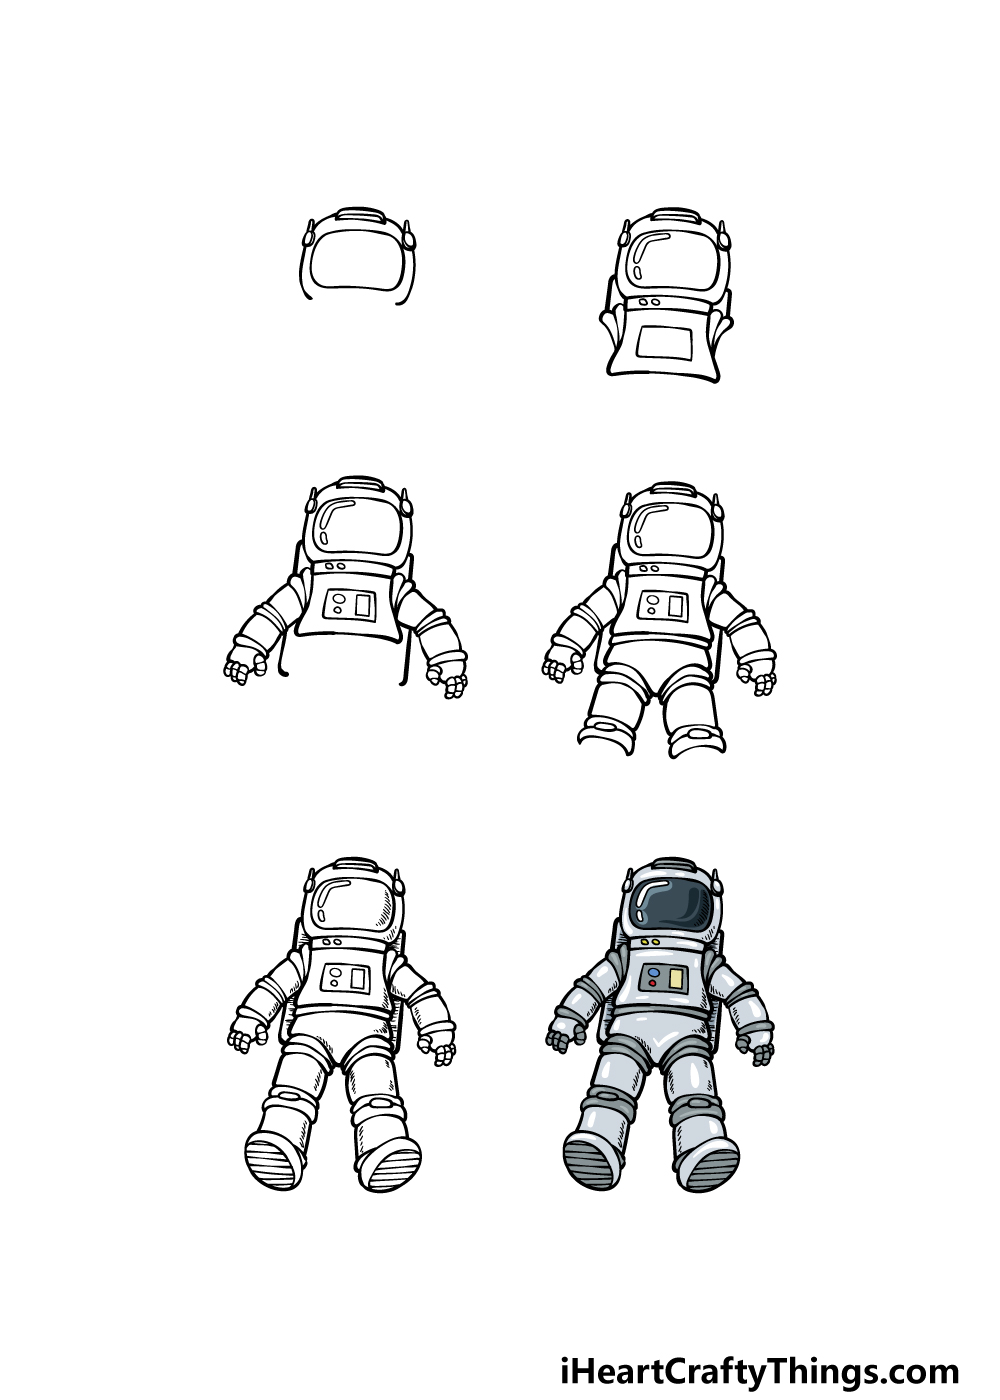 how to draw an astronaut step by step